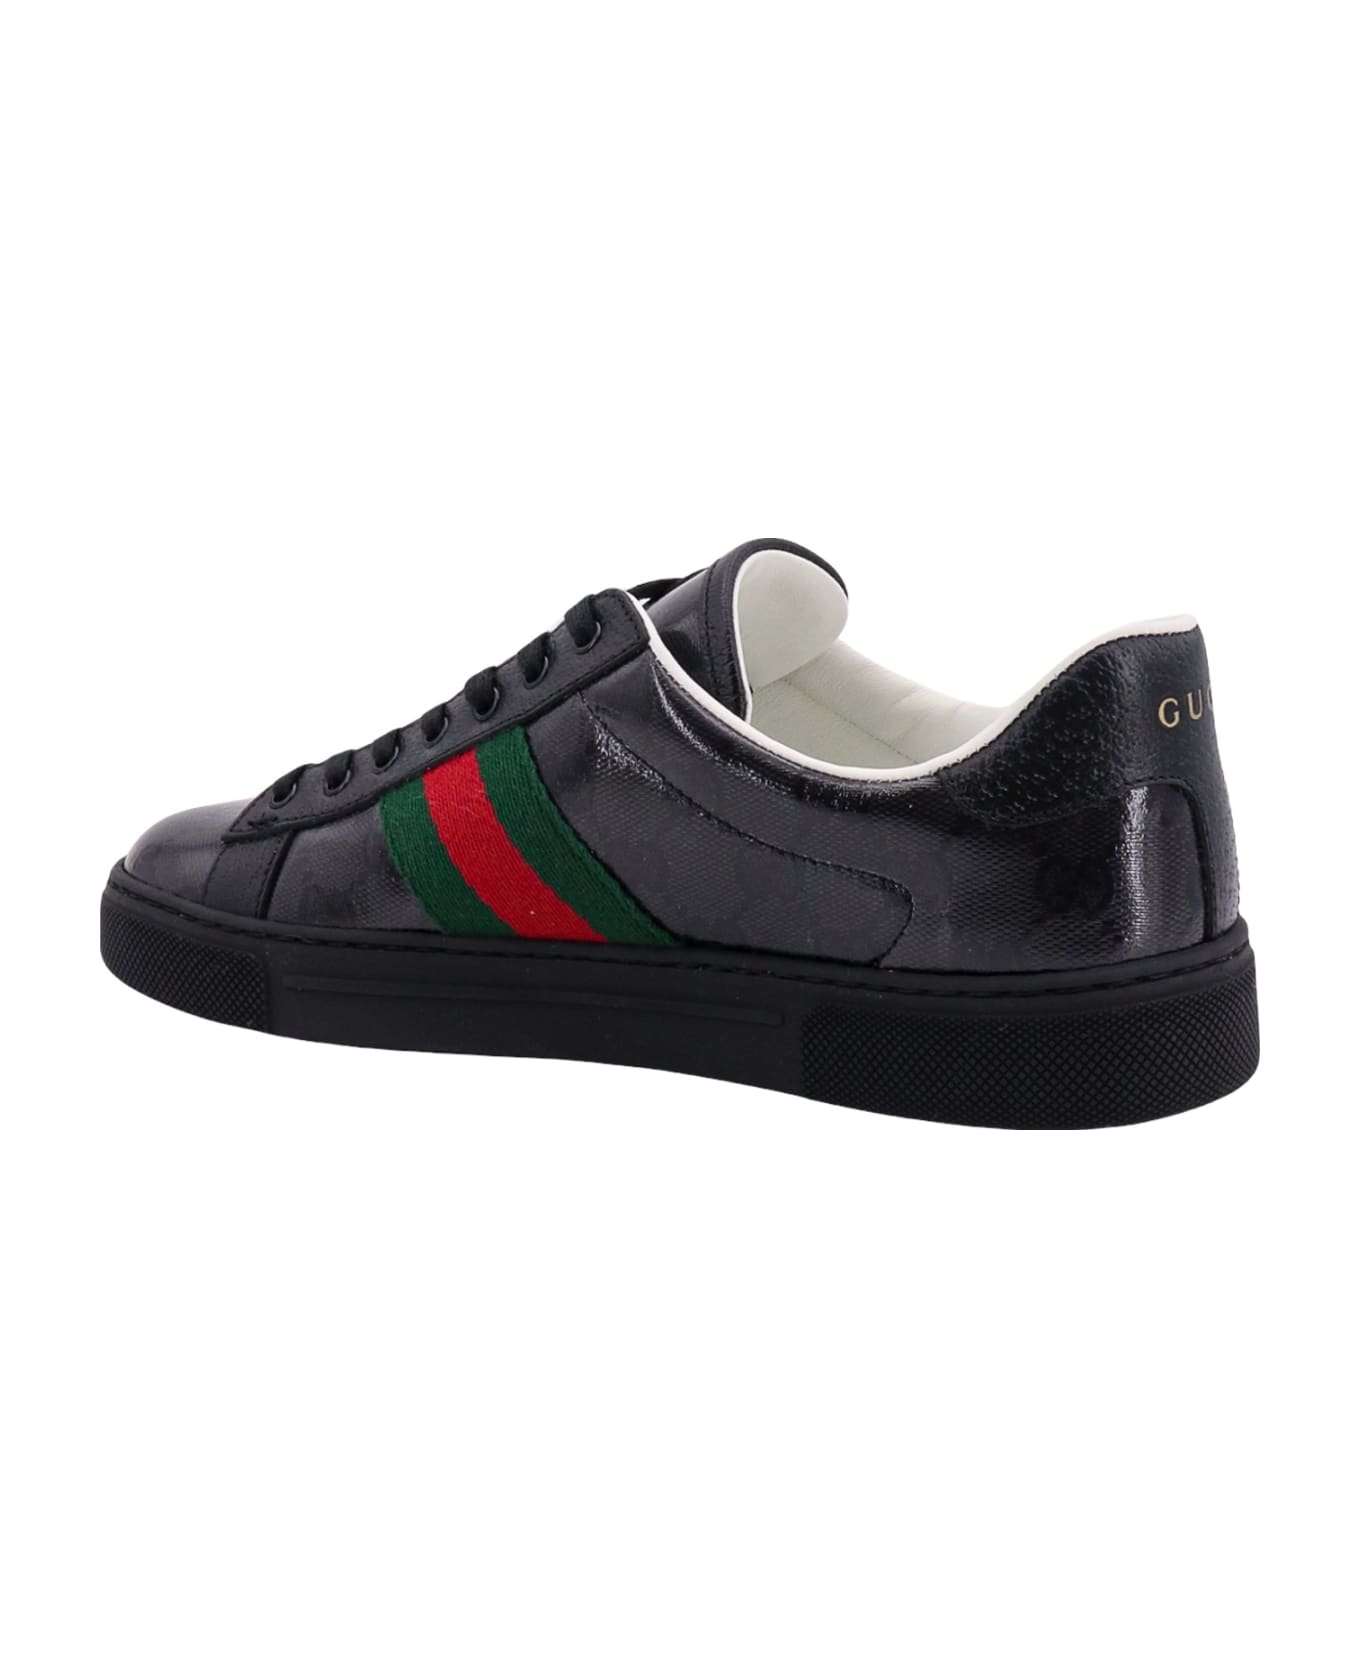 Gucci Ace Sneakers - Black スニーカー